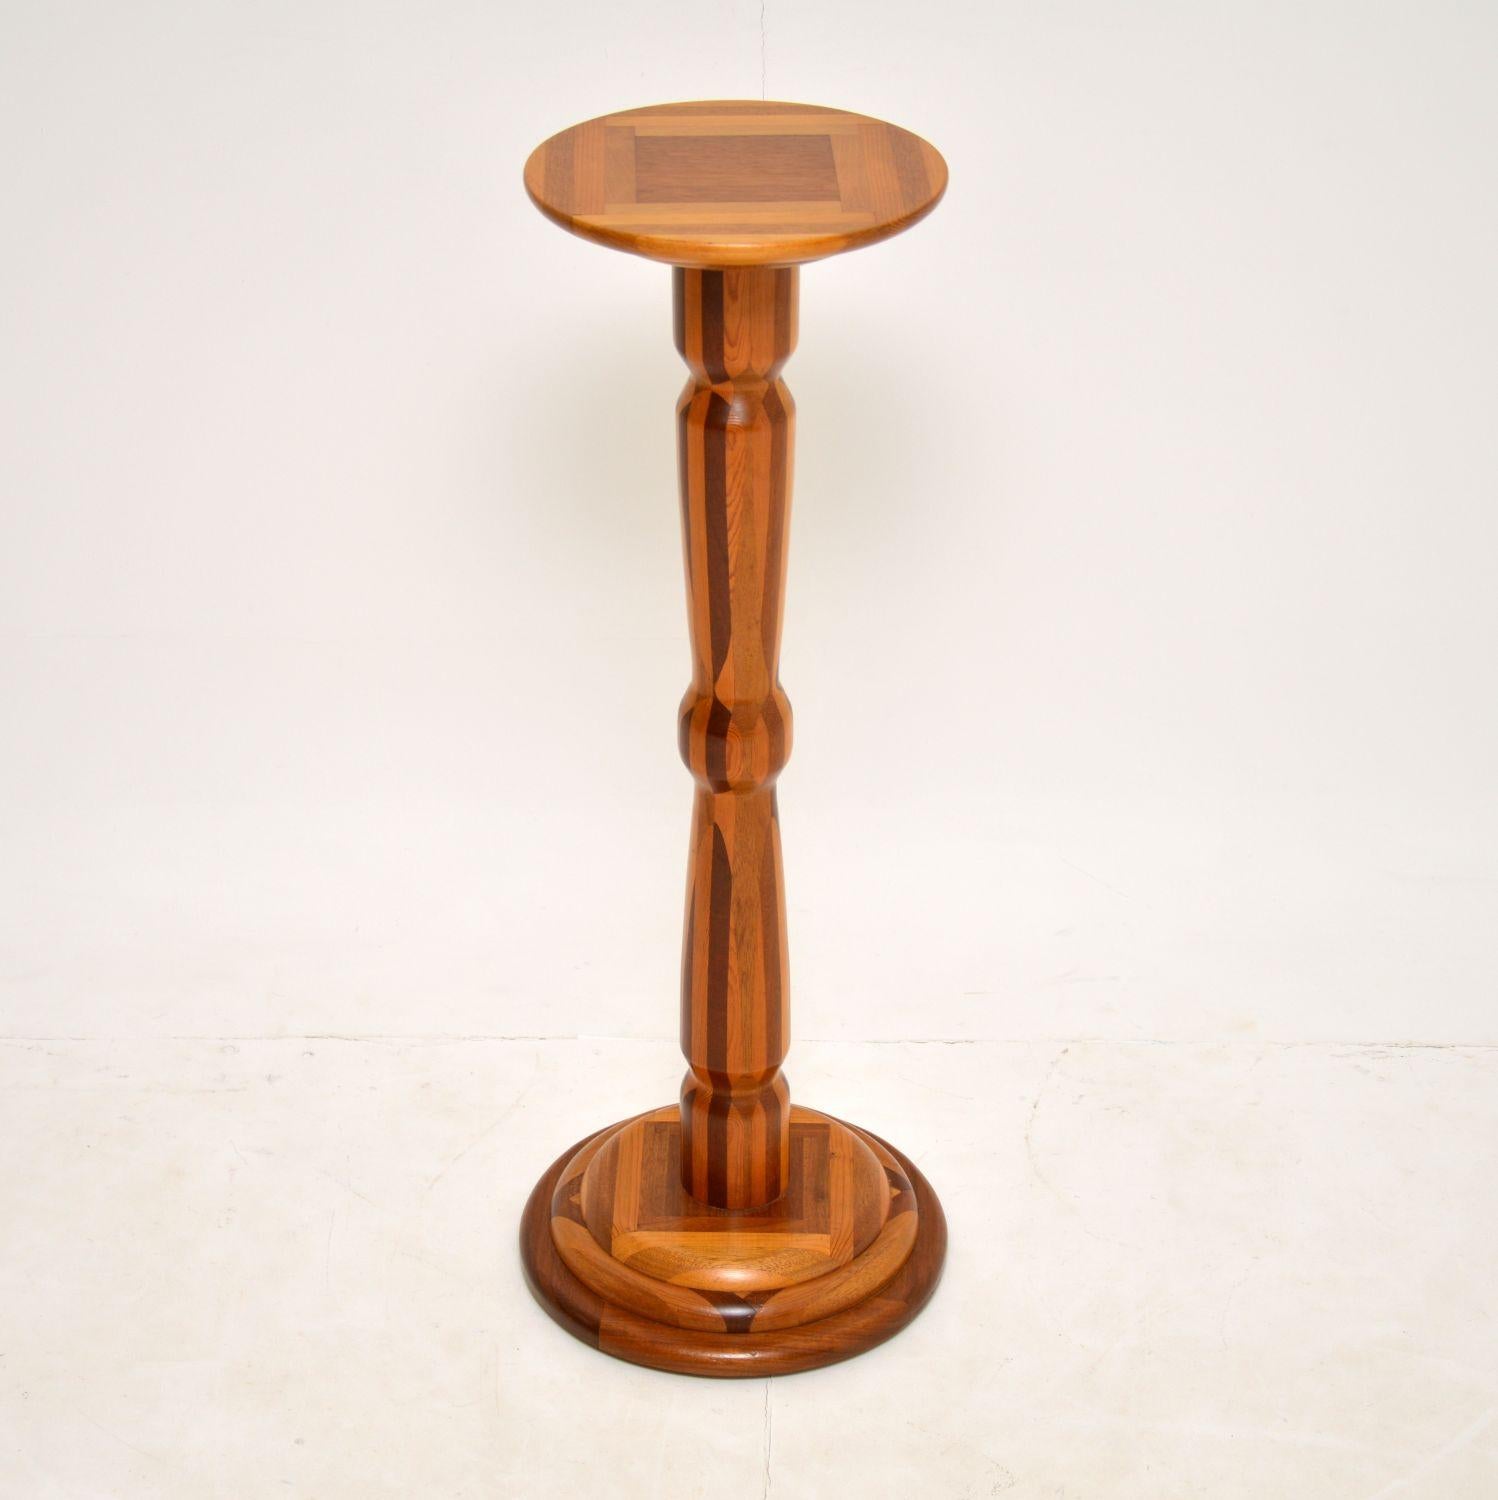 A fantastic vintage tall side table, beautifully made from various solid woods. We believe this was made in New Zealand by Sovereign, it dates from around the 1960-70’s.

We have had a similar side table by Sovereign before which was labelled,